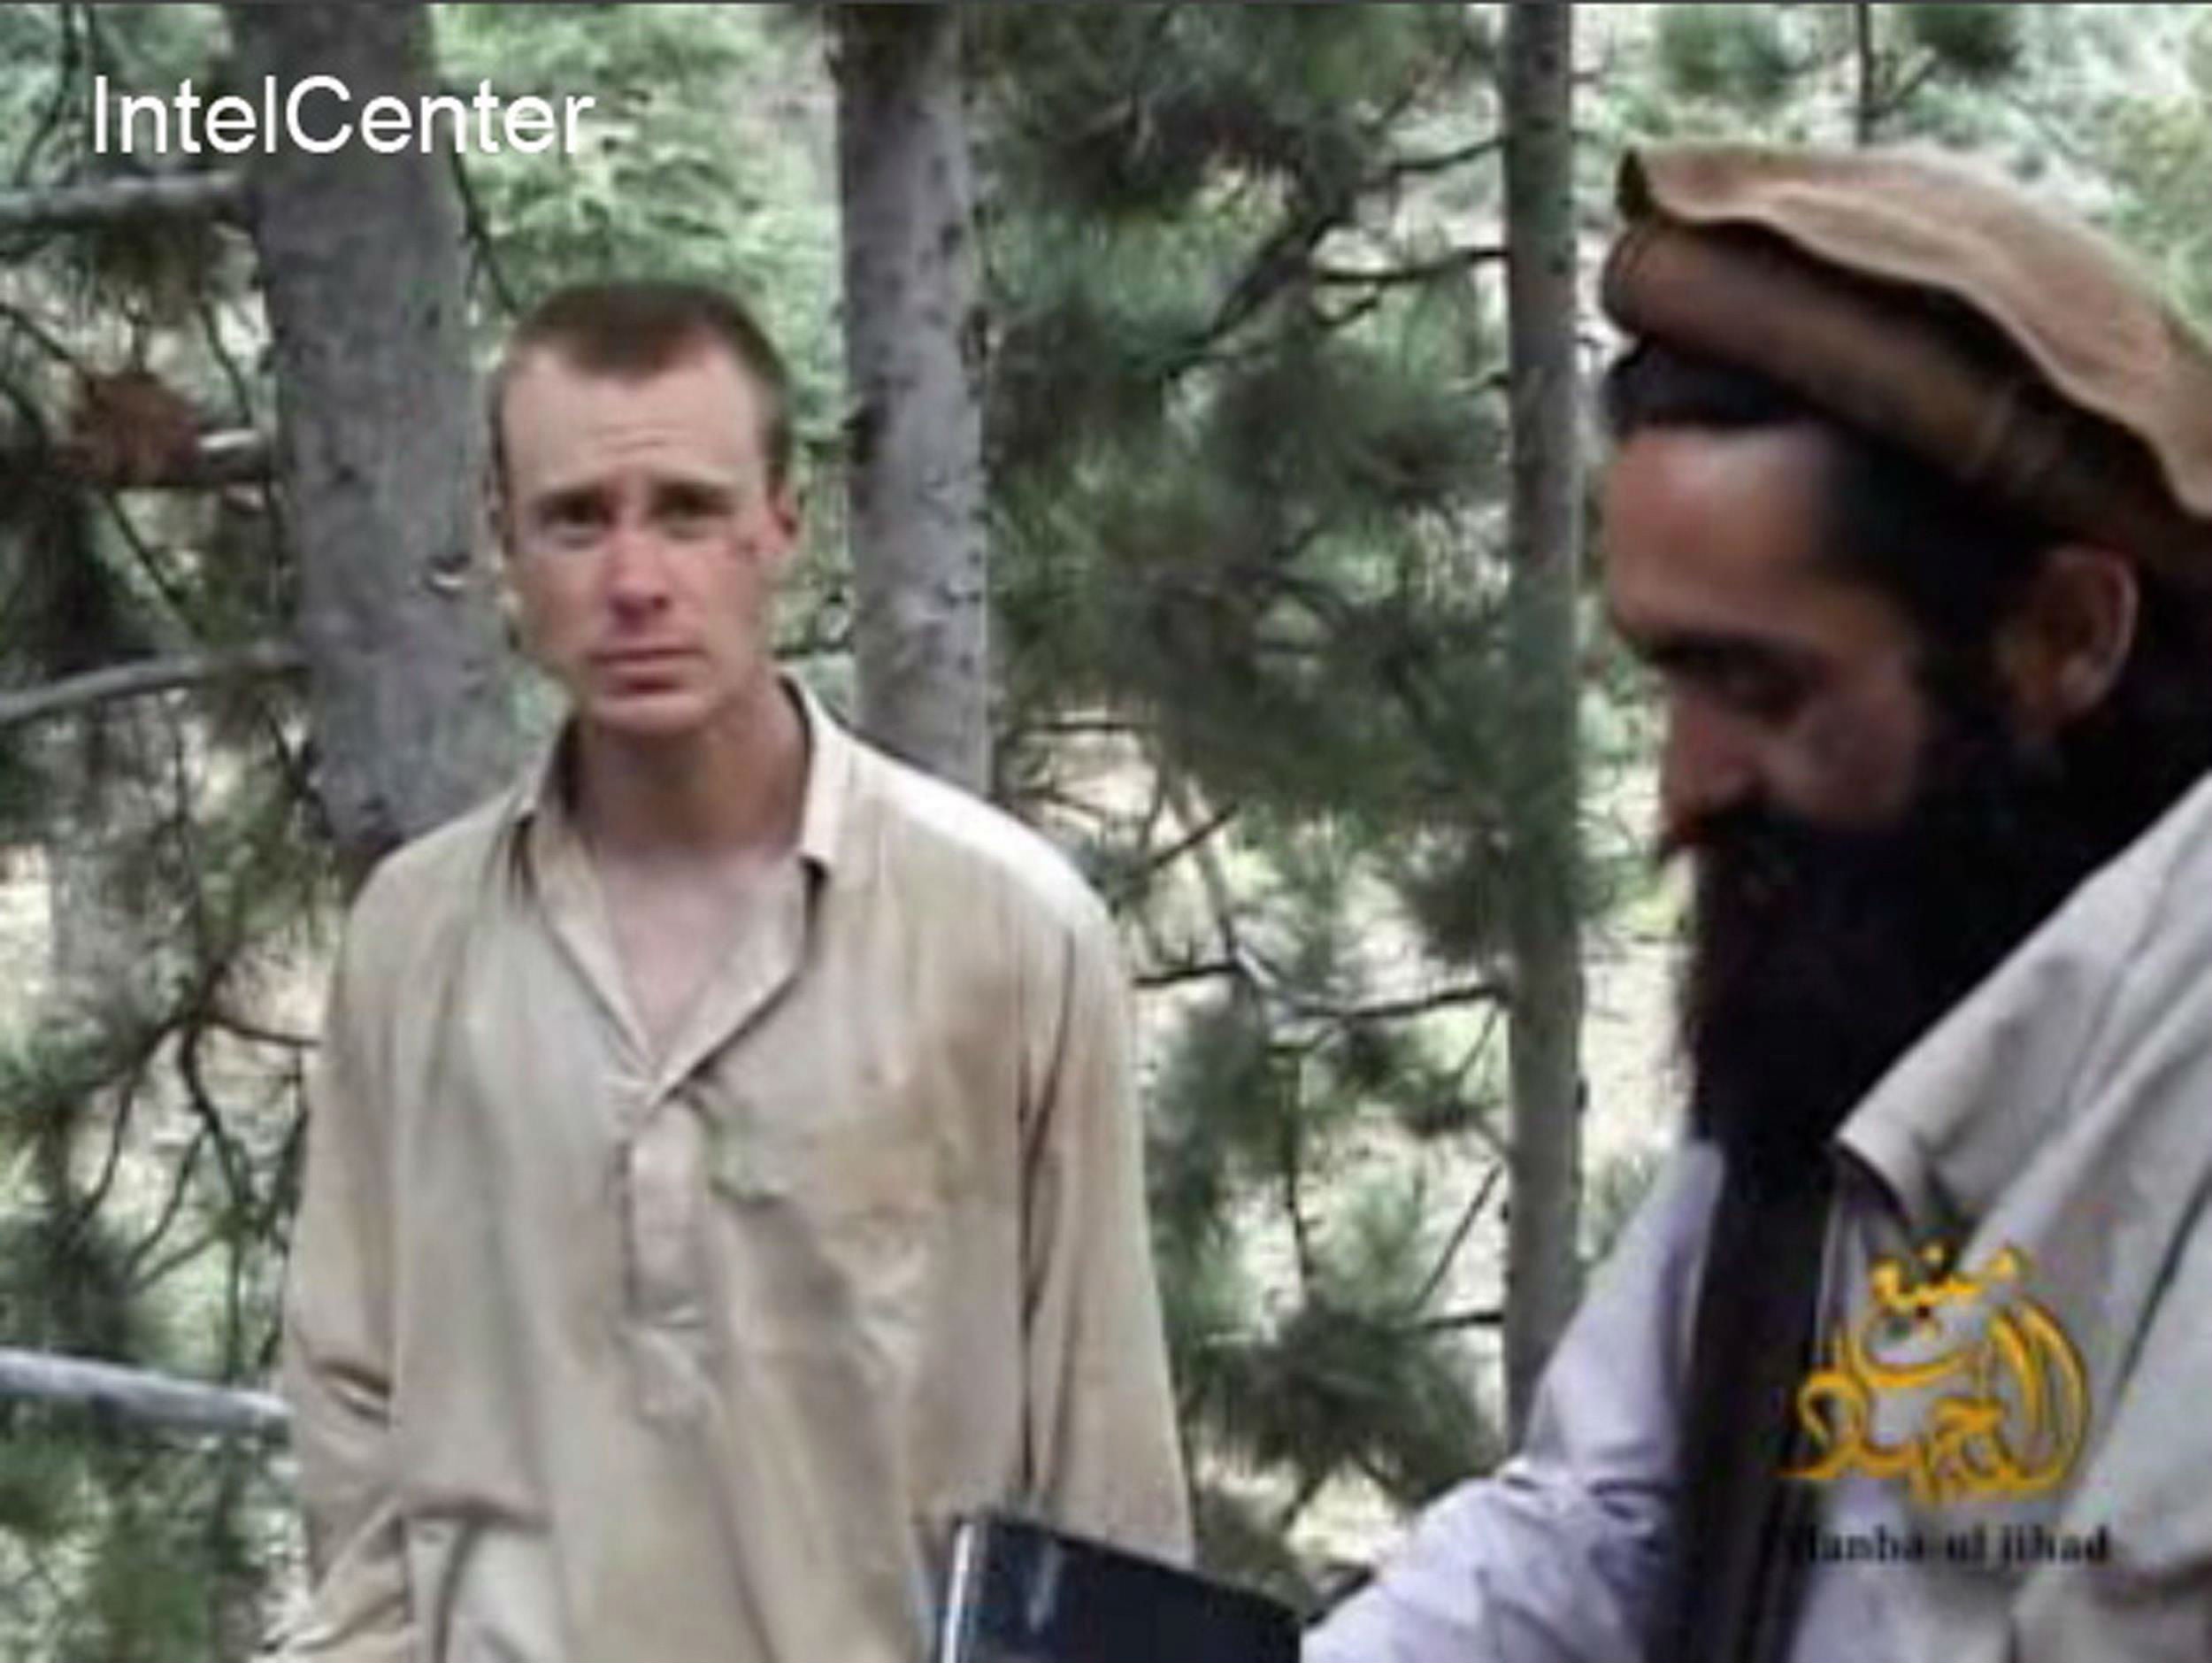 Mr Bergdahl was held by the Taliban for five years